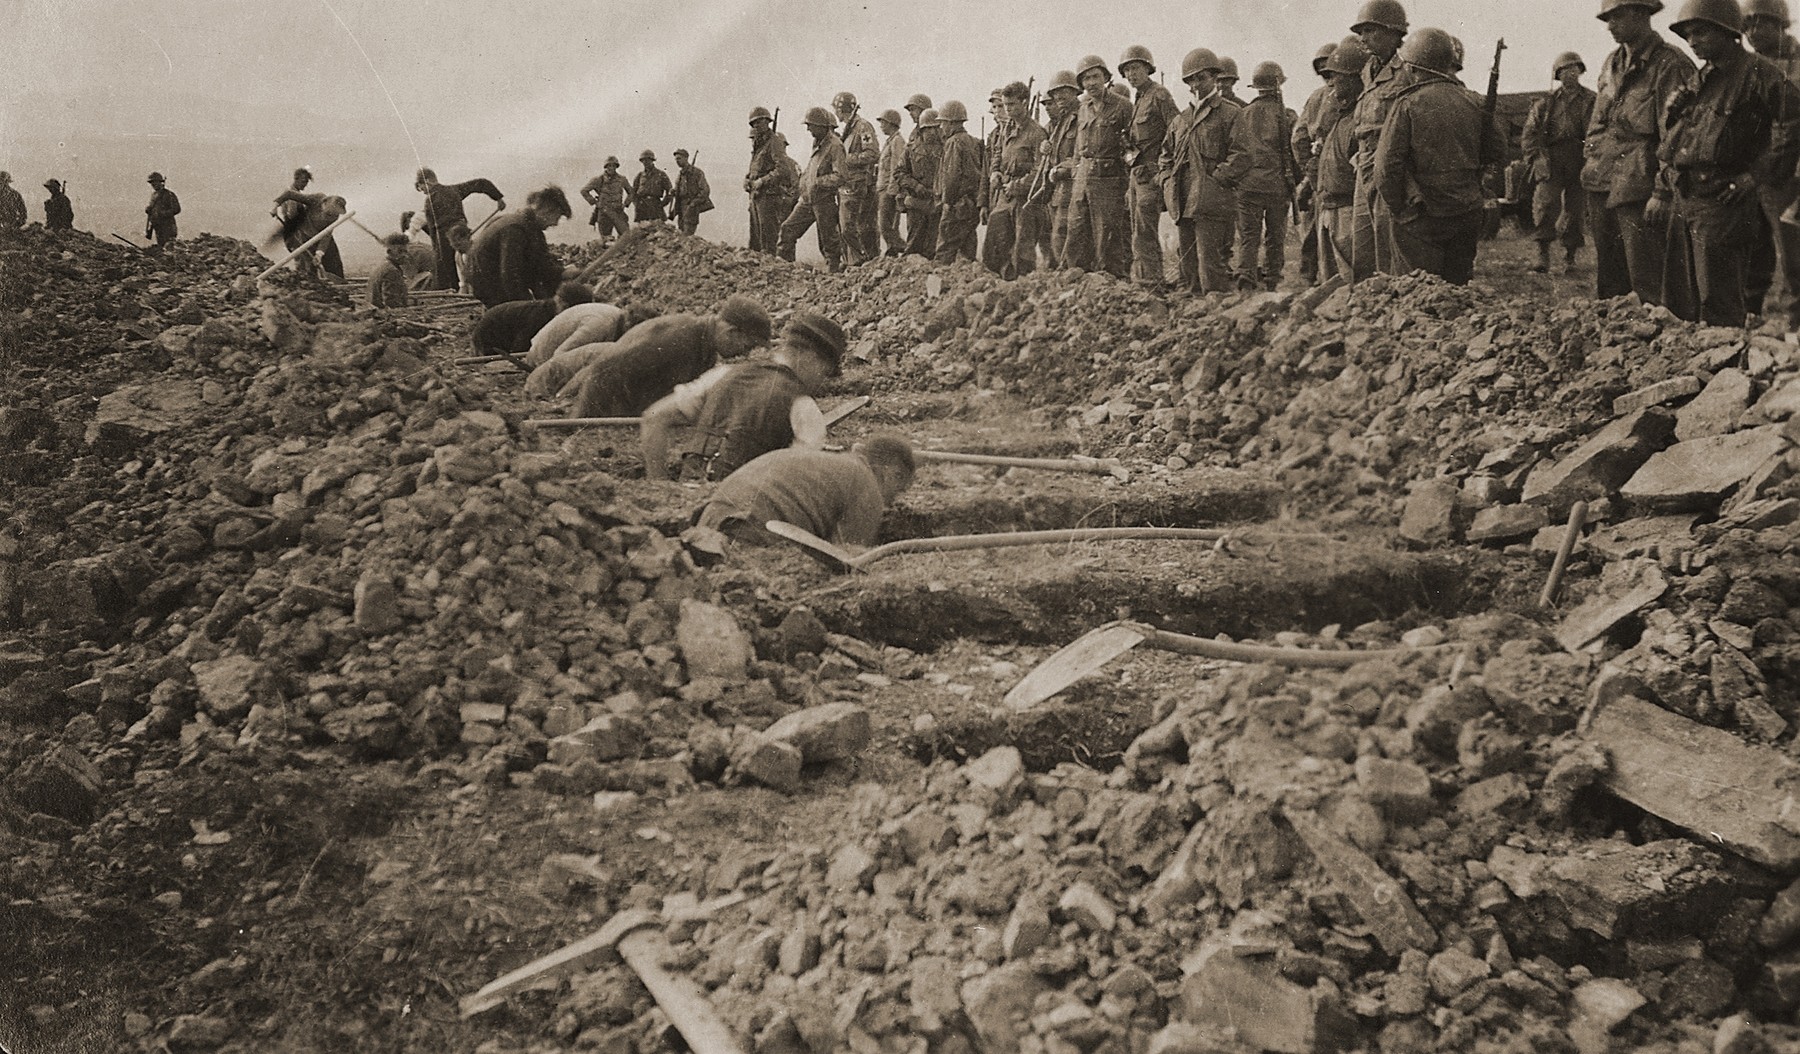 American troops look on as German civilians from nearby towns dig graves for corpses found in the Ohrdruf concentration camp.